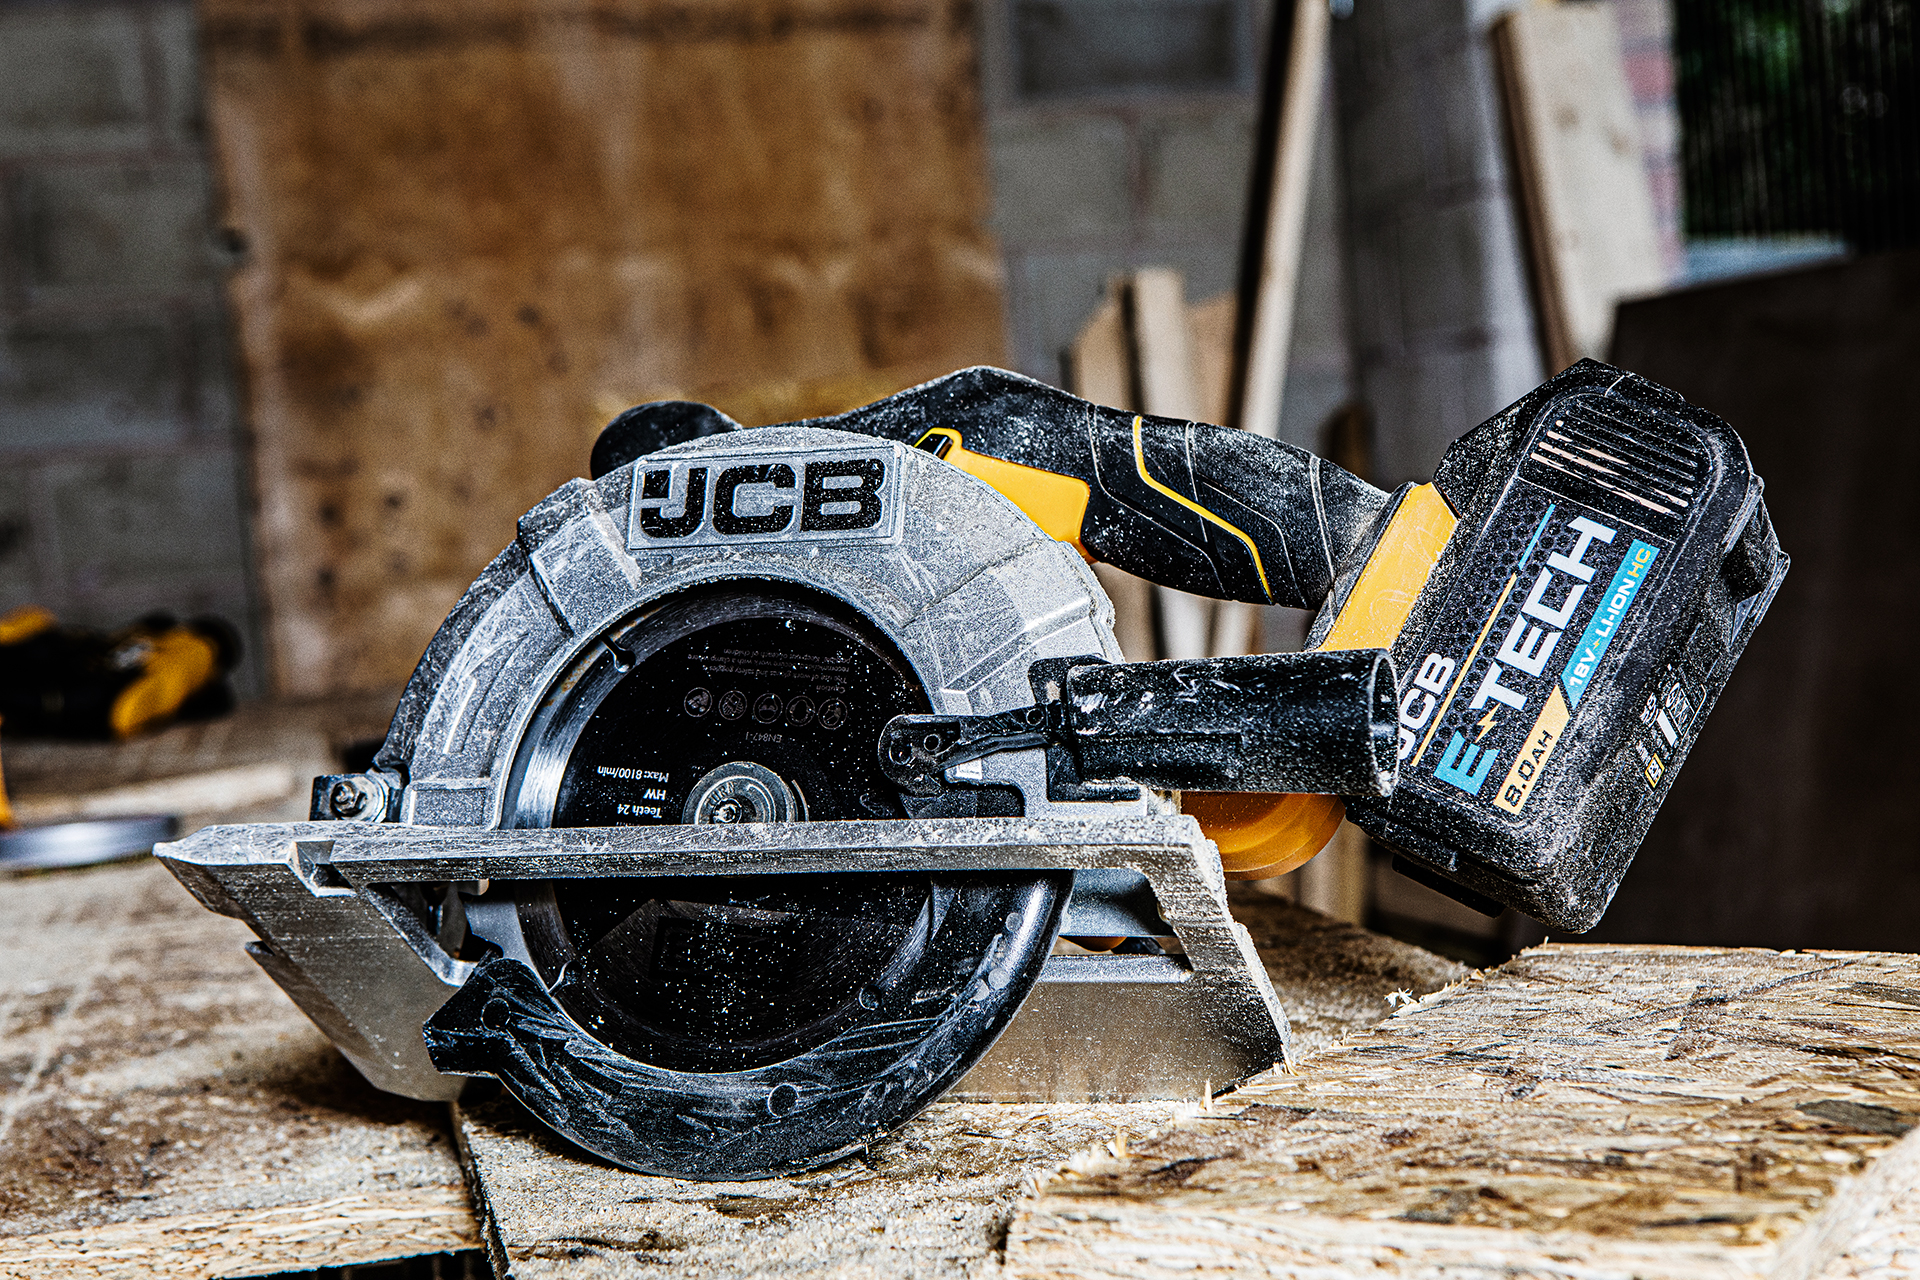 commercial-product-photography-for-jcb-tools-chot-on-location-in-manchester